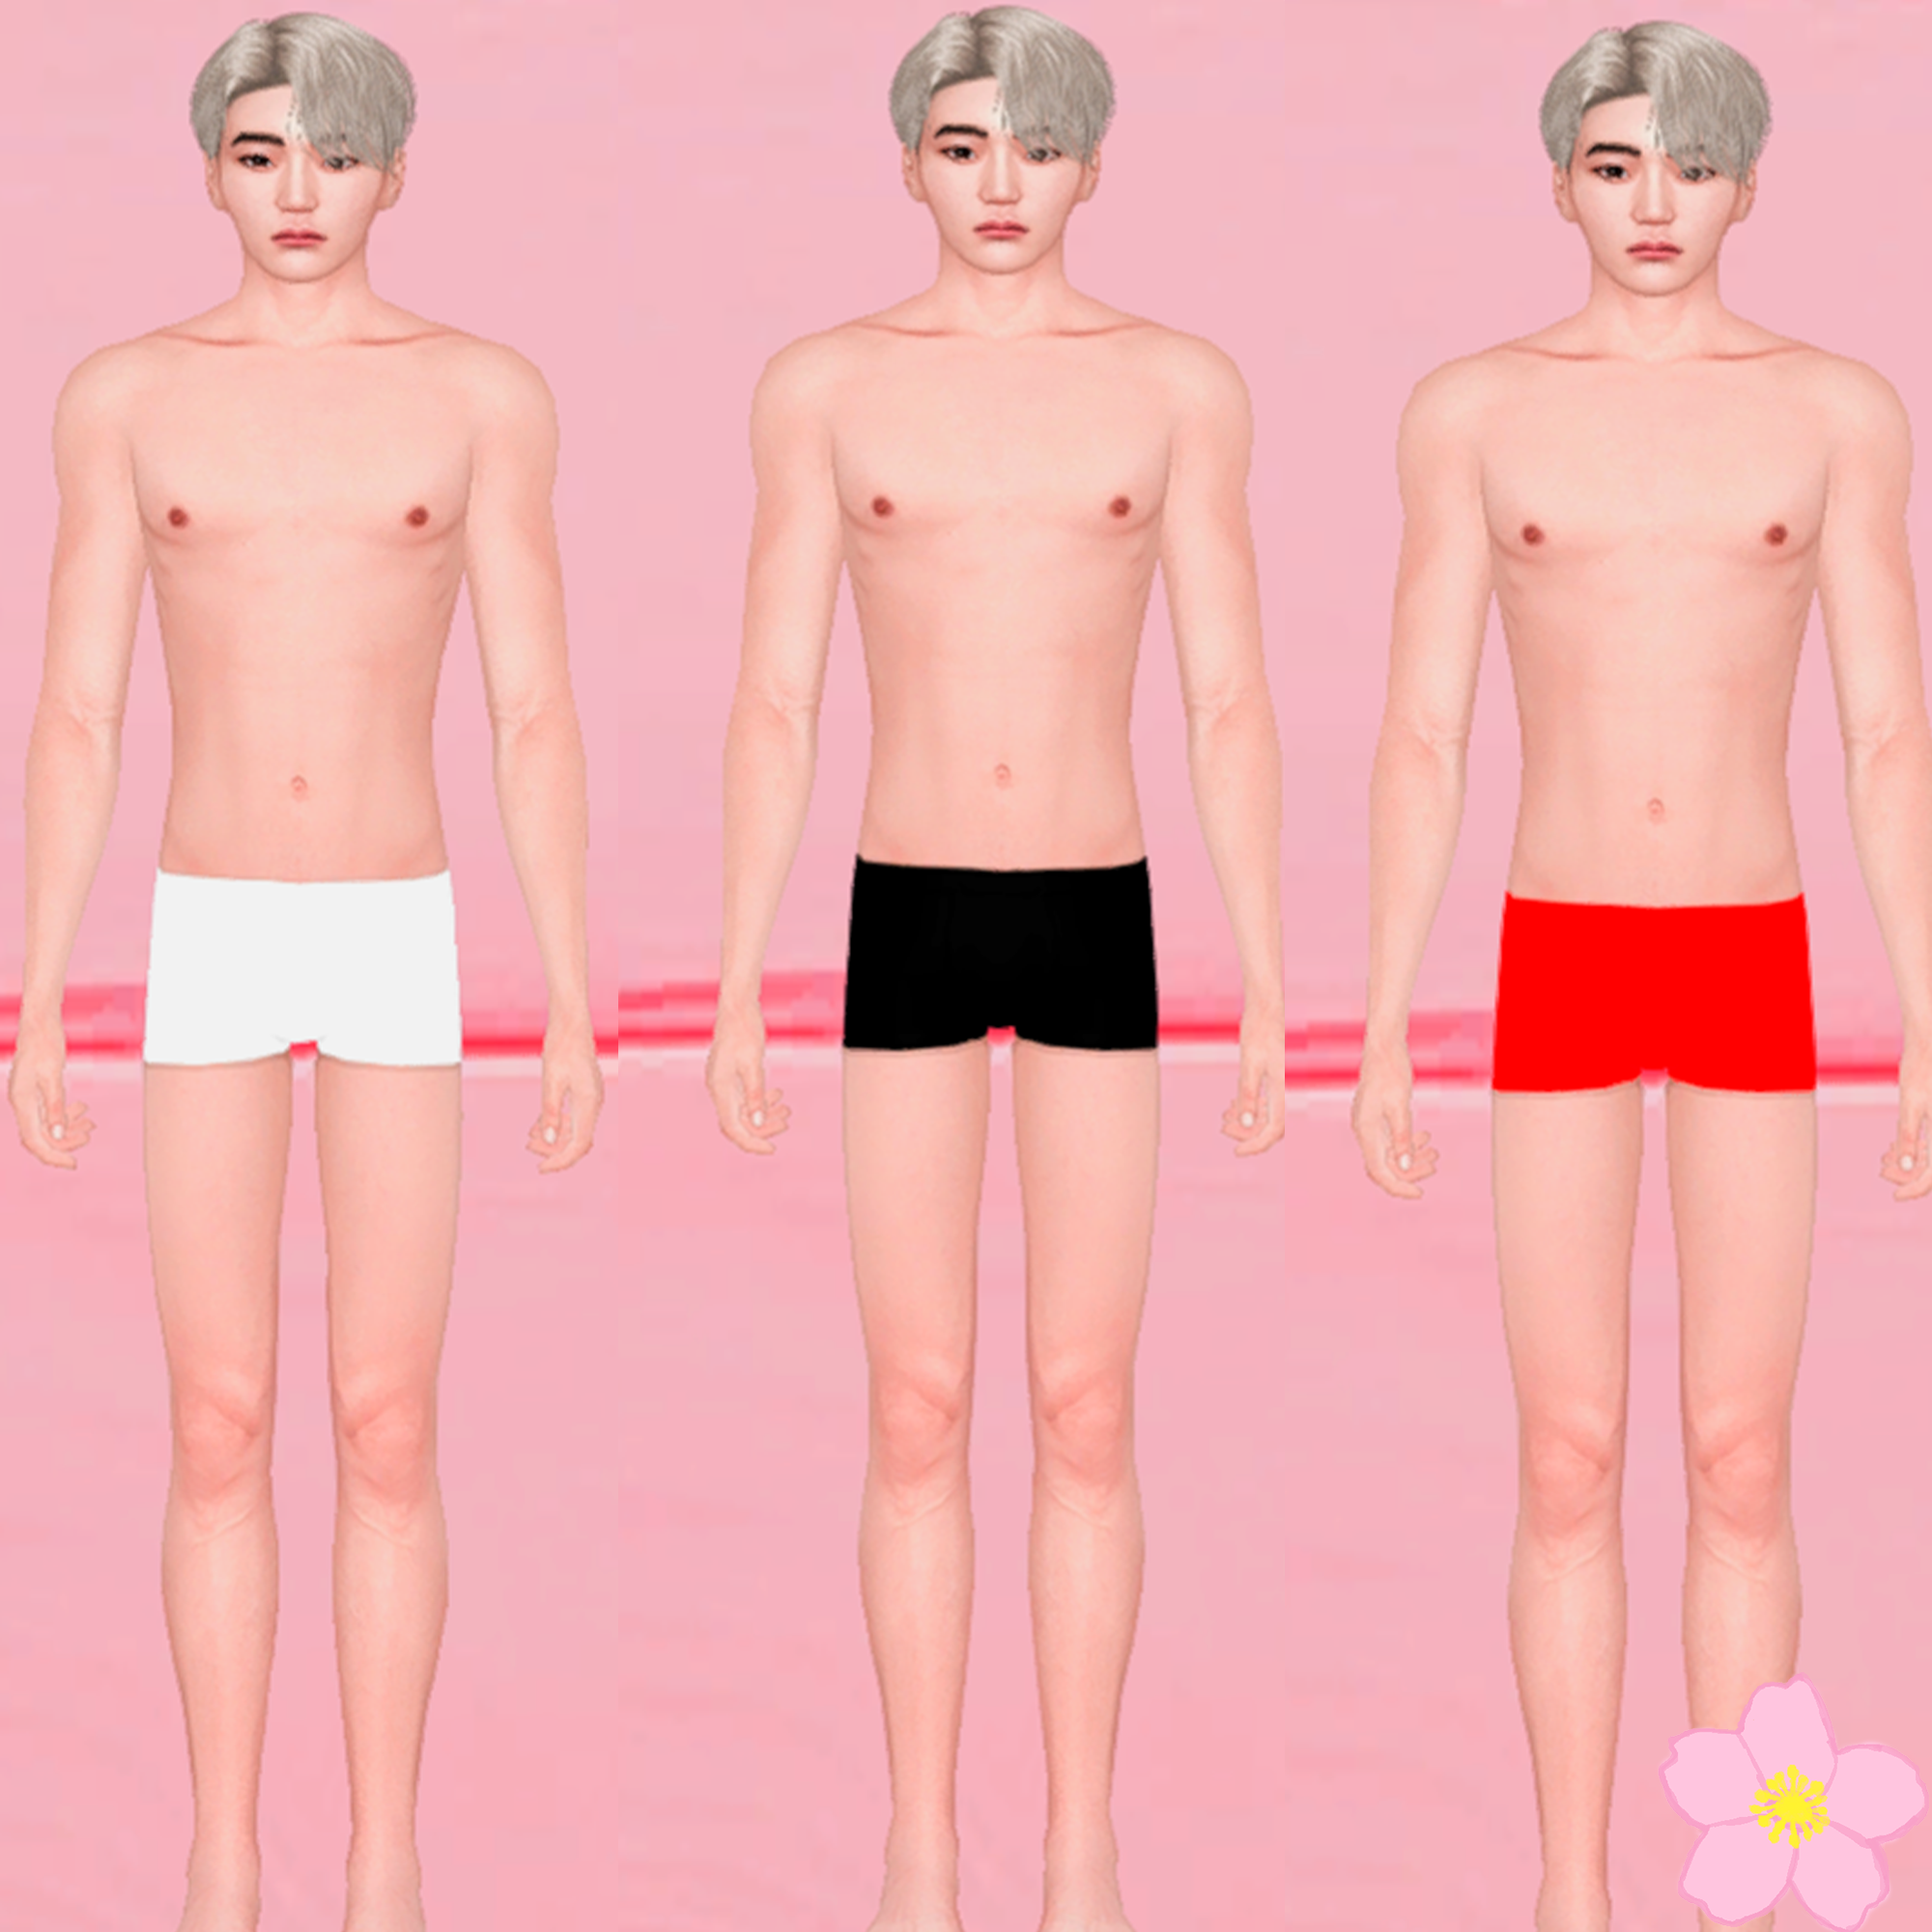 The Sims Resource - Default Replacement Underwear Top and Bottom